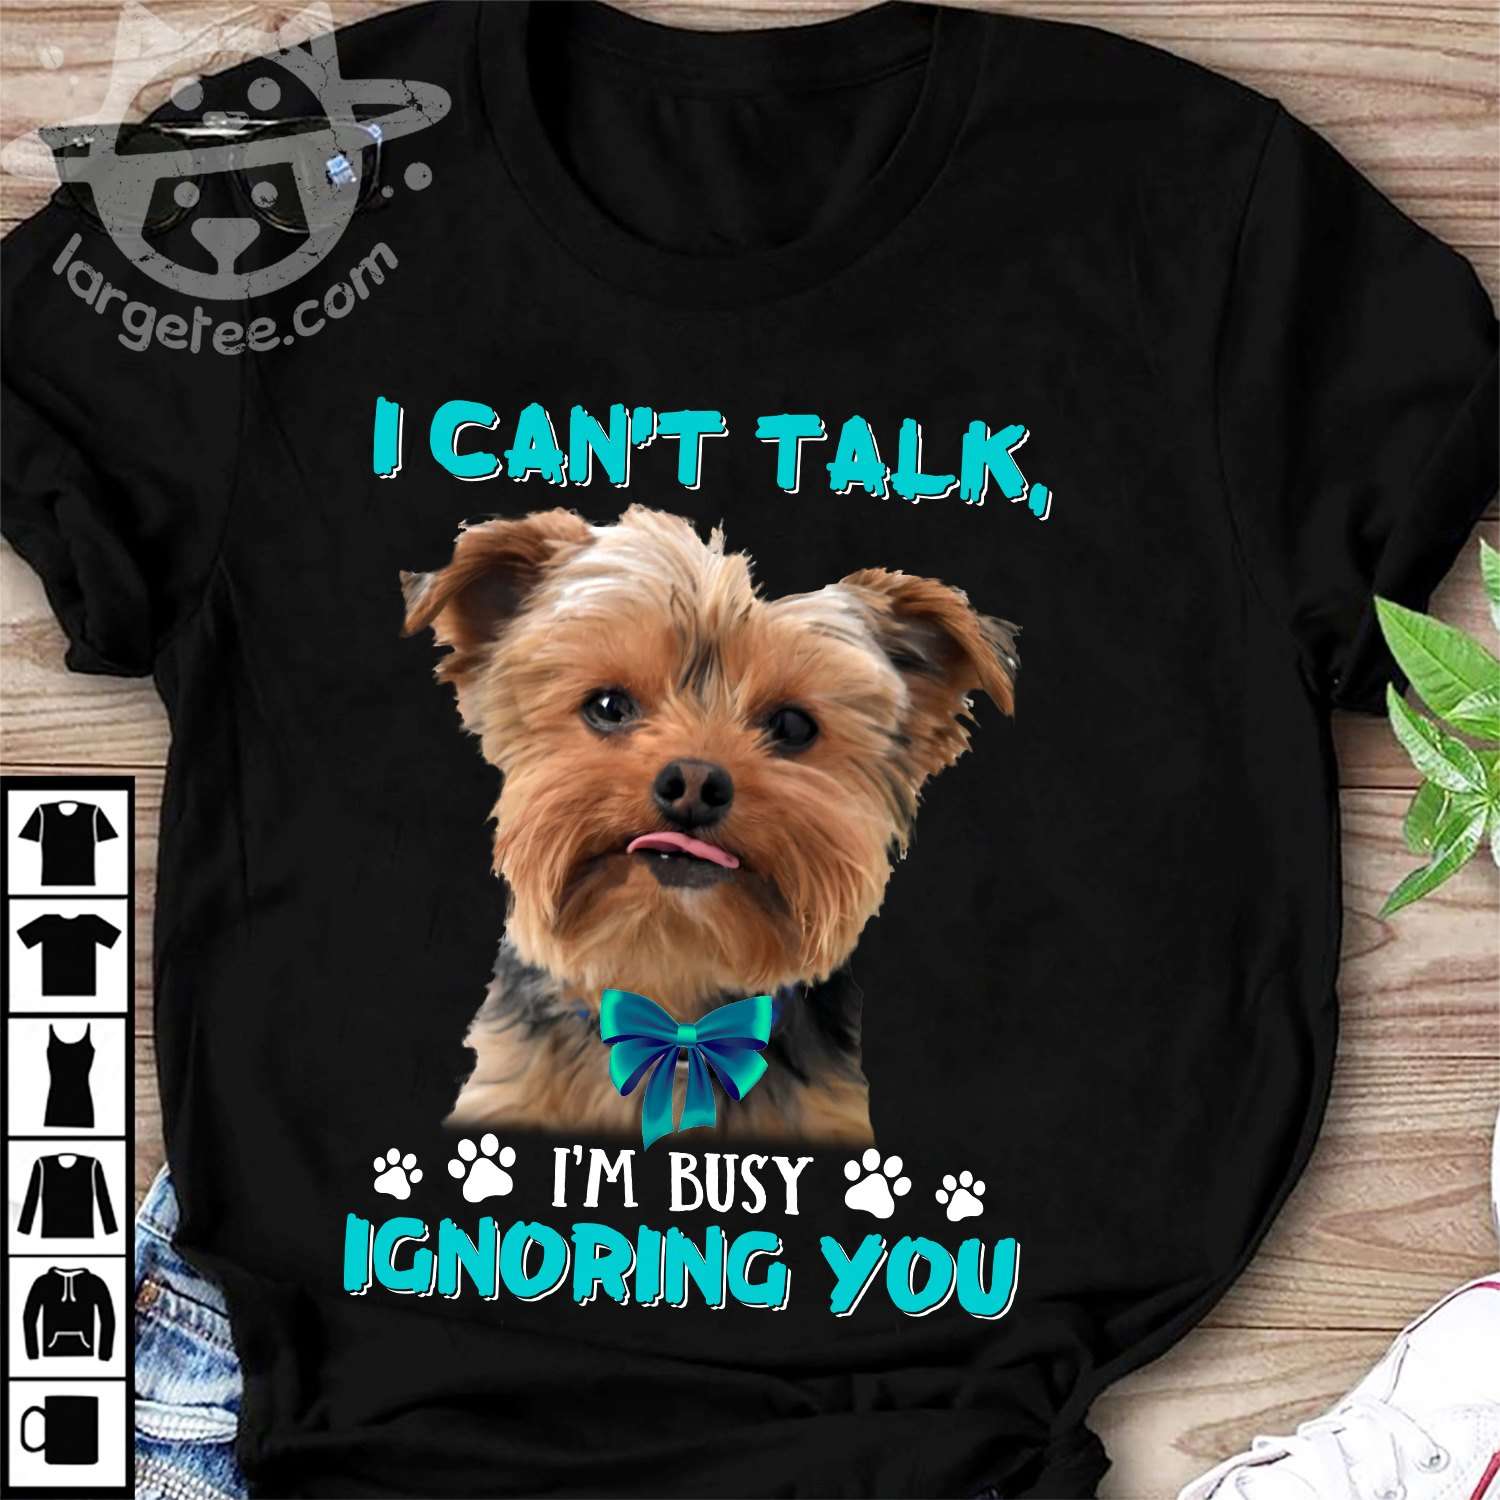 I can't talk, I'm busy ignoring you - Yorkshire terrier